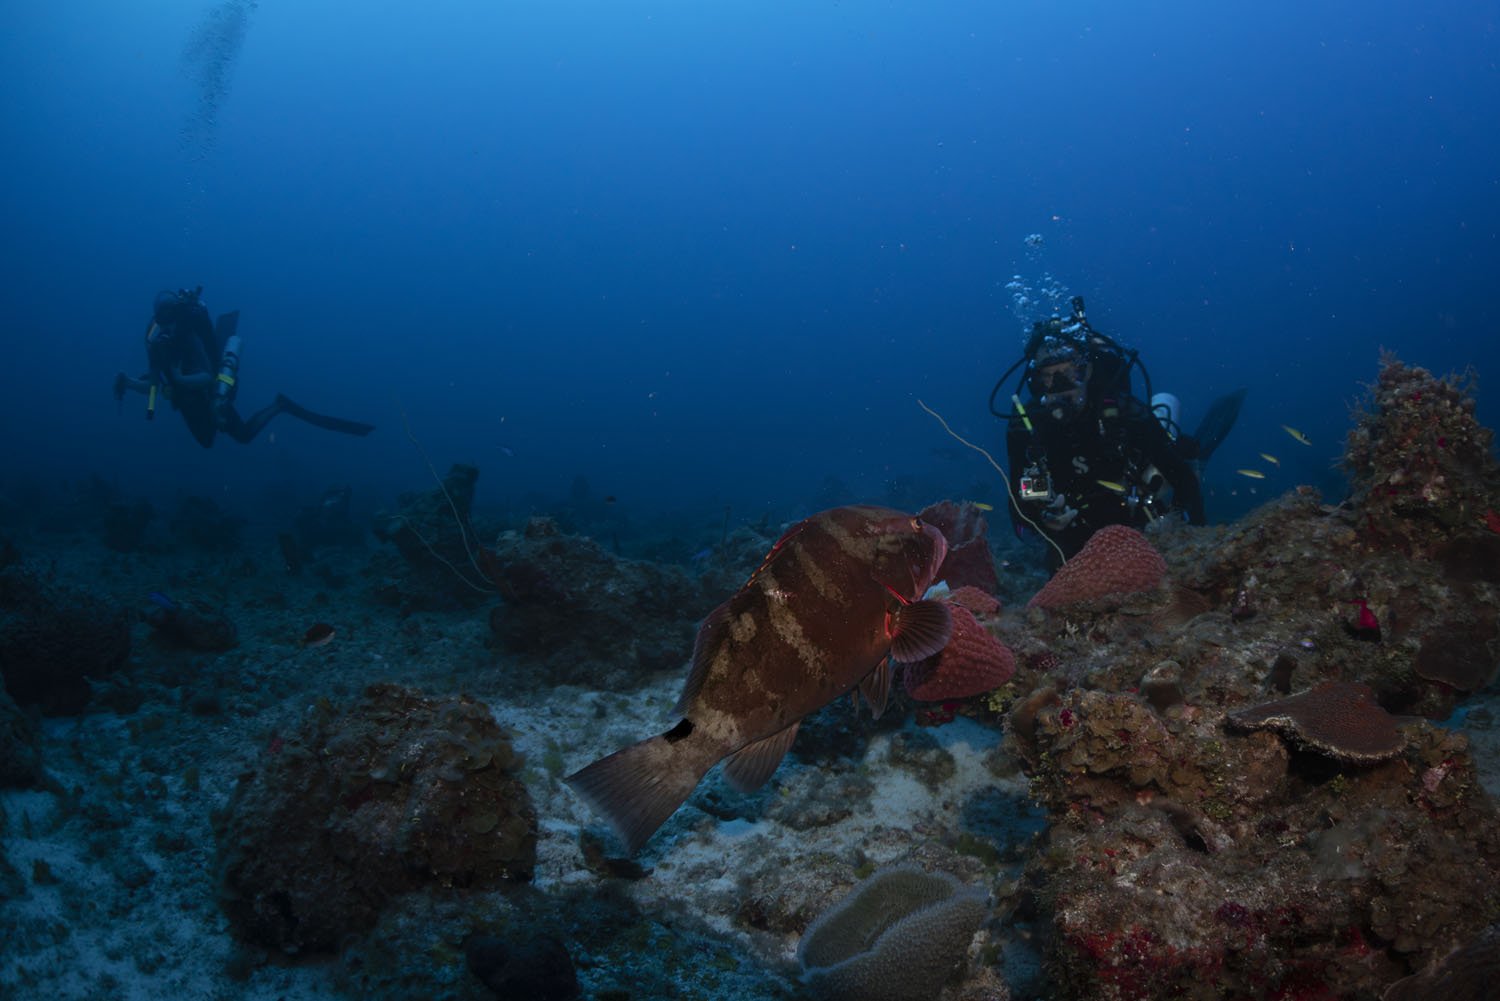  After decades of research on the Grammanik Bank, some of the Nassau Grouper have become accustomed to Nemeth’s presence. Some even seem to approach to welcome him back. 